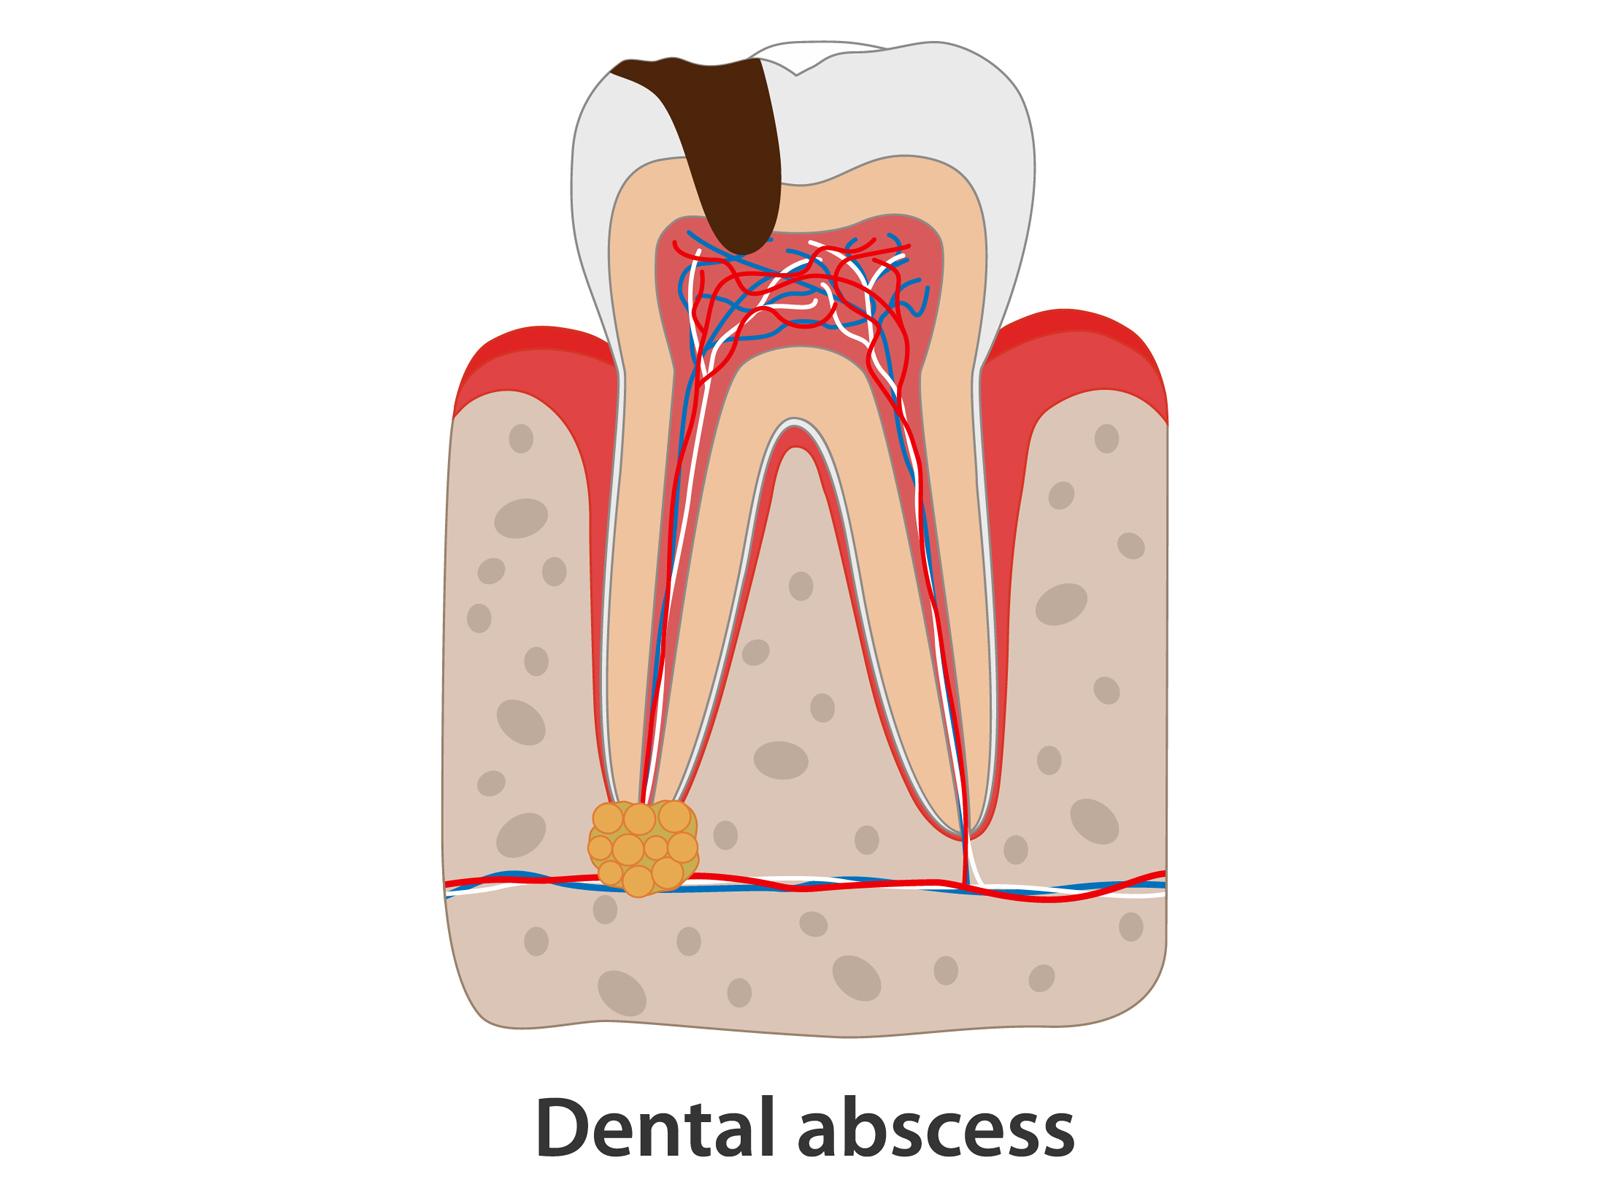 How do I know if my tooth abscess is spreading?